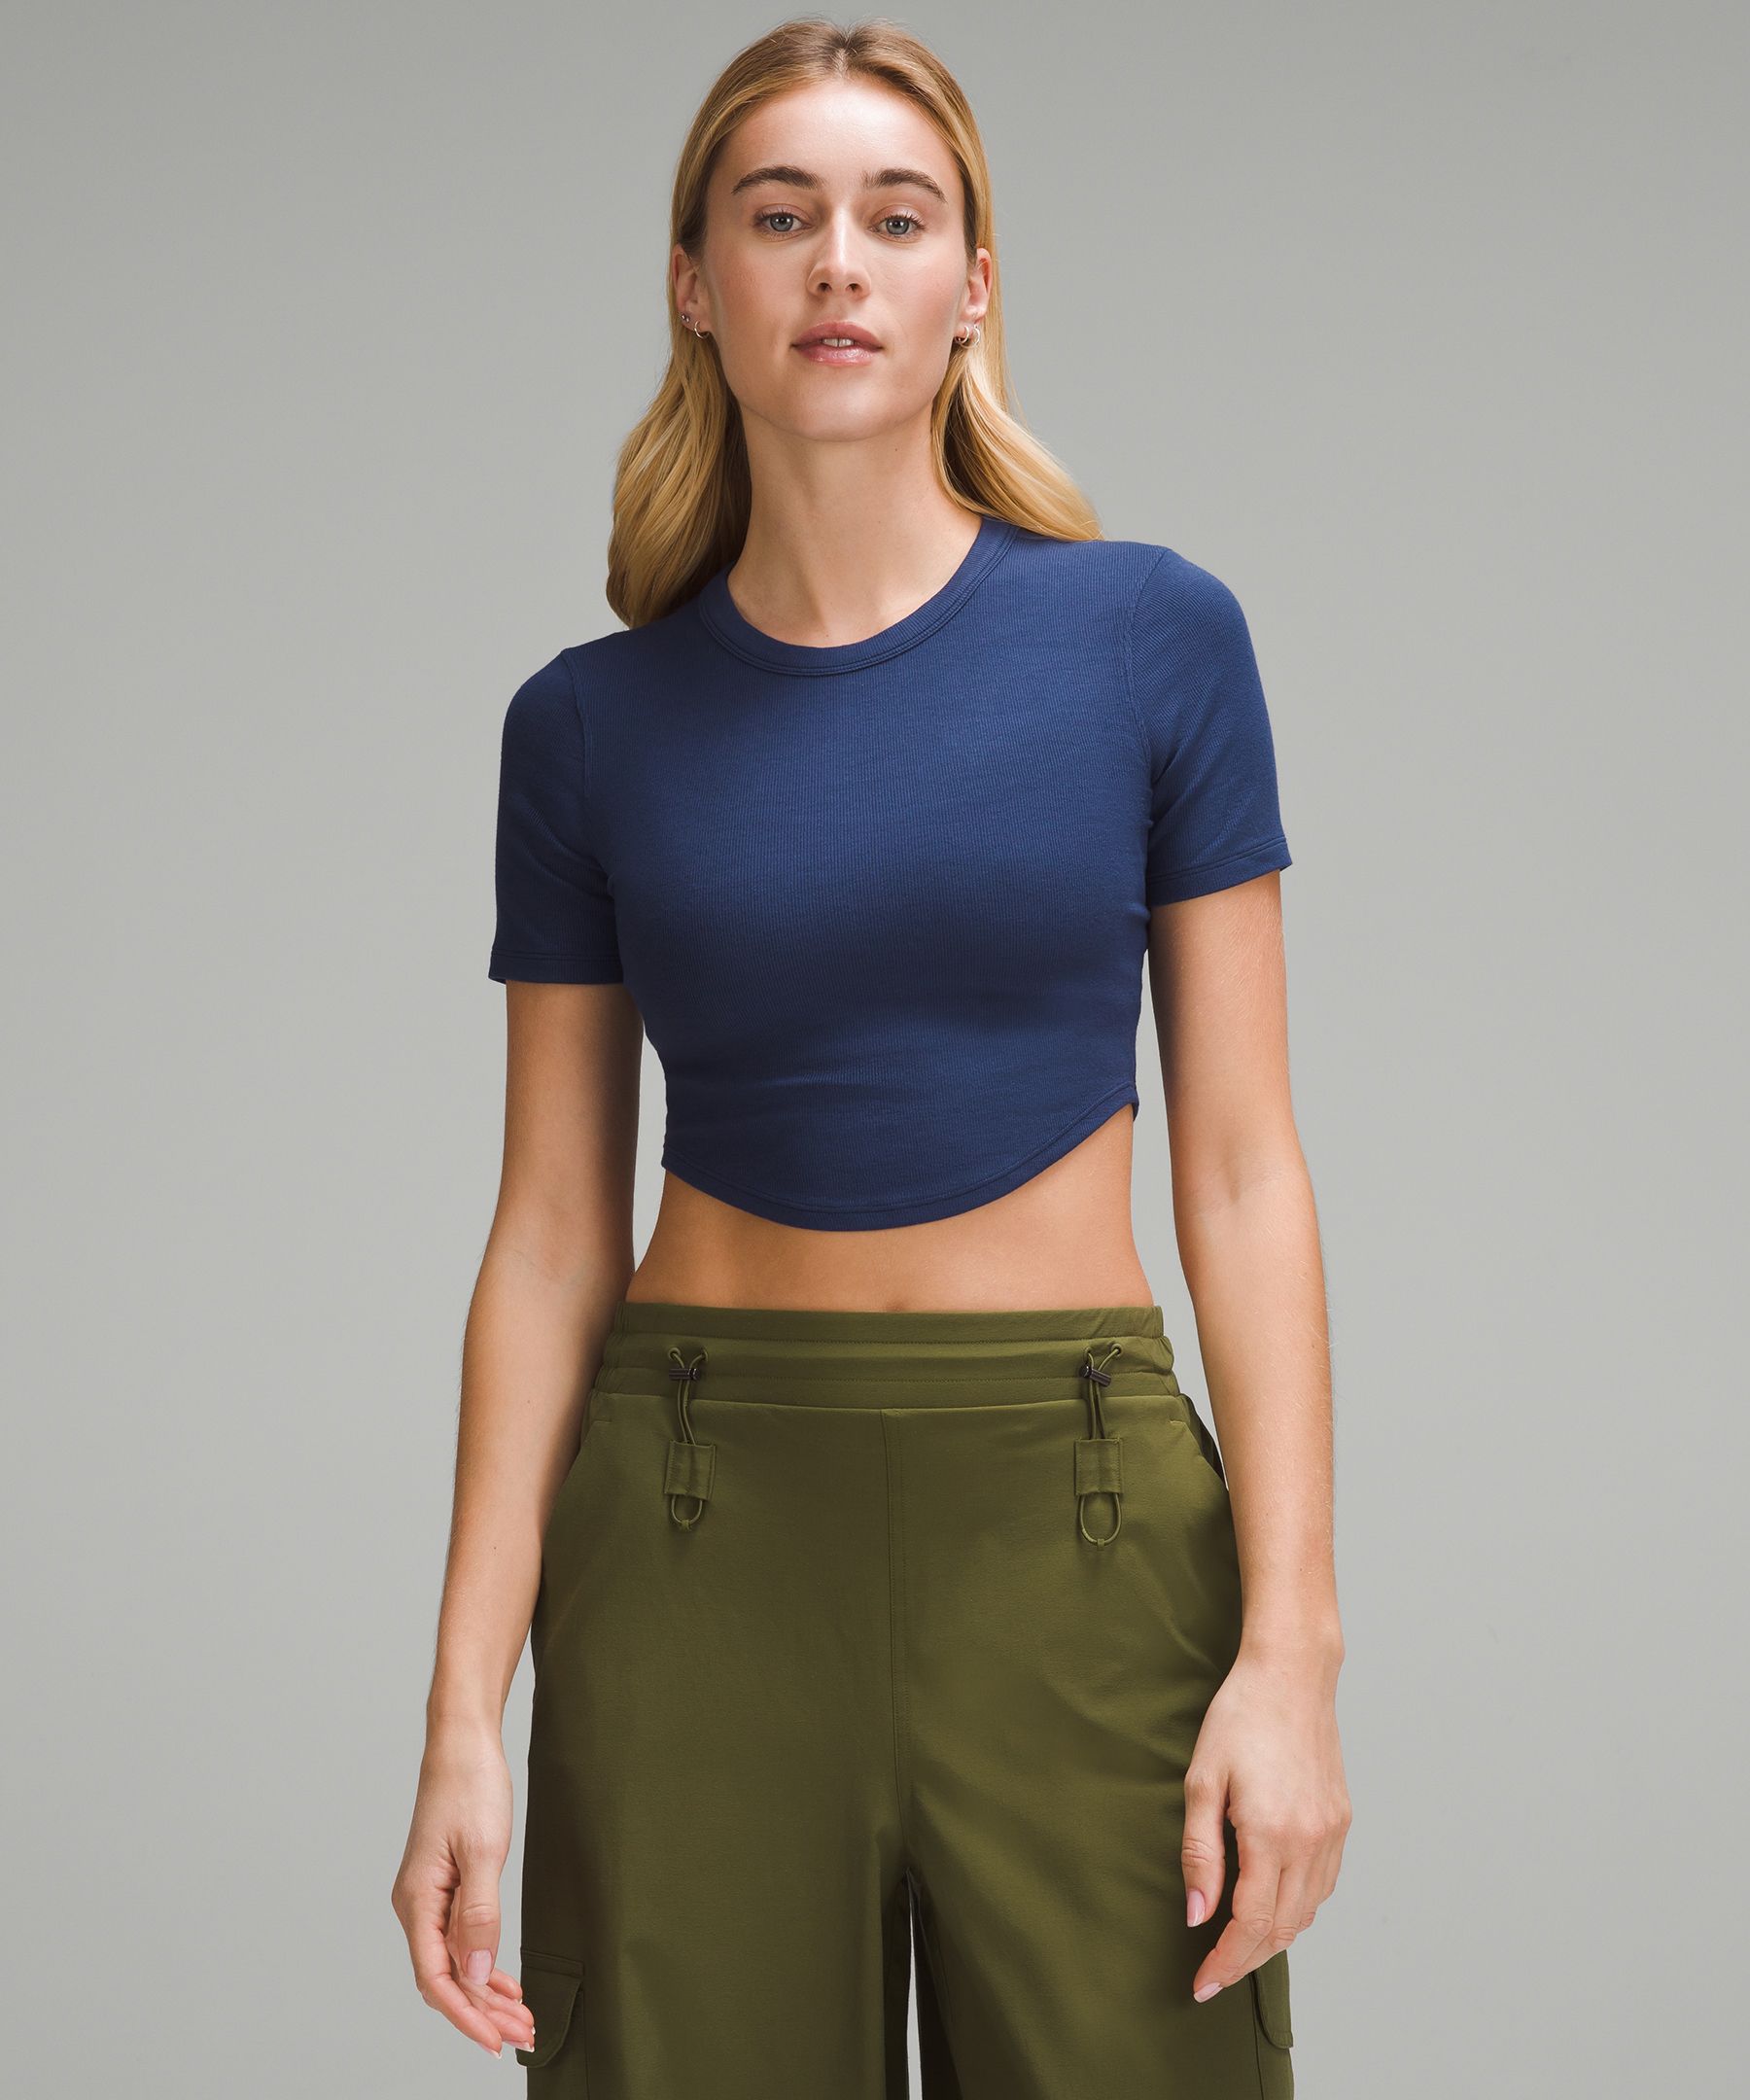 Hold Tight Cropped T-Shirt, Short Sleeve Tops